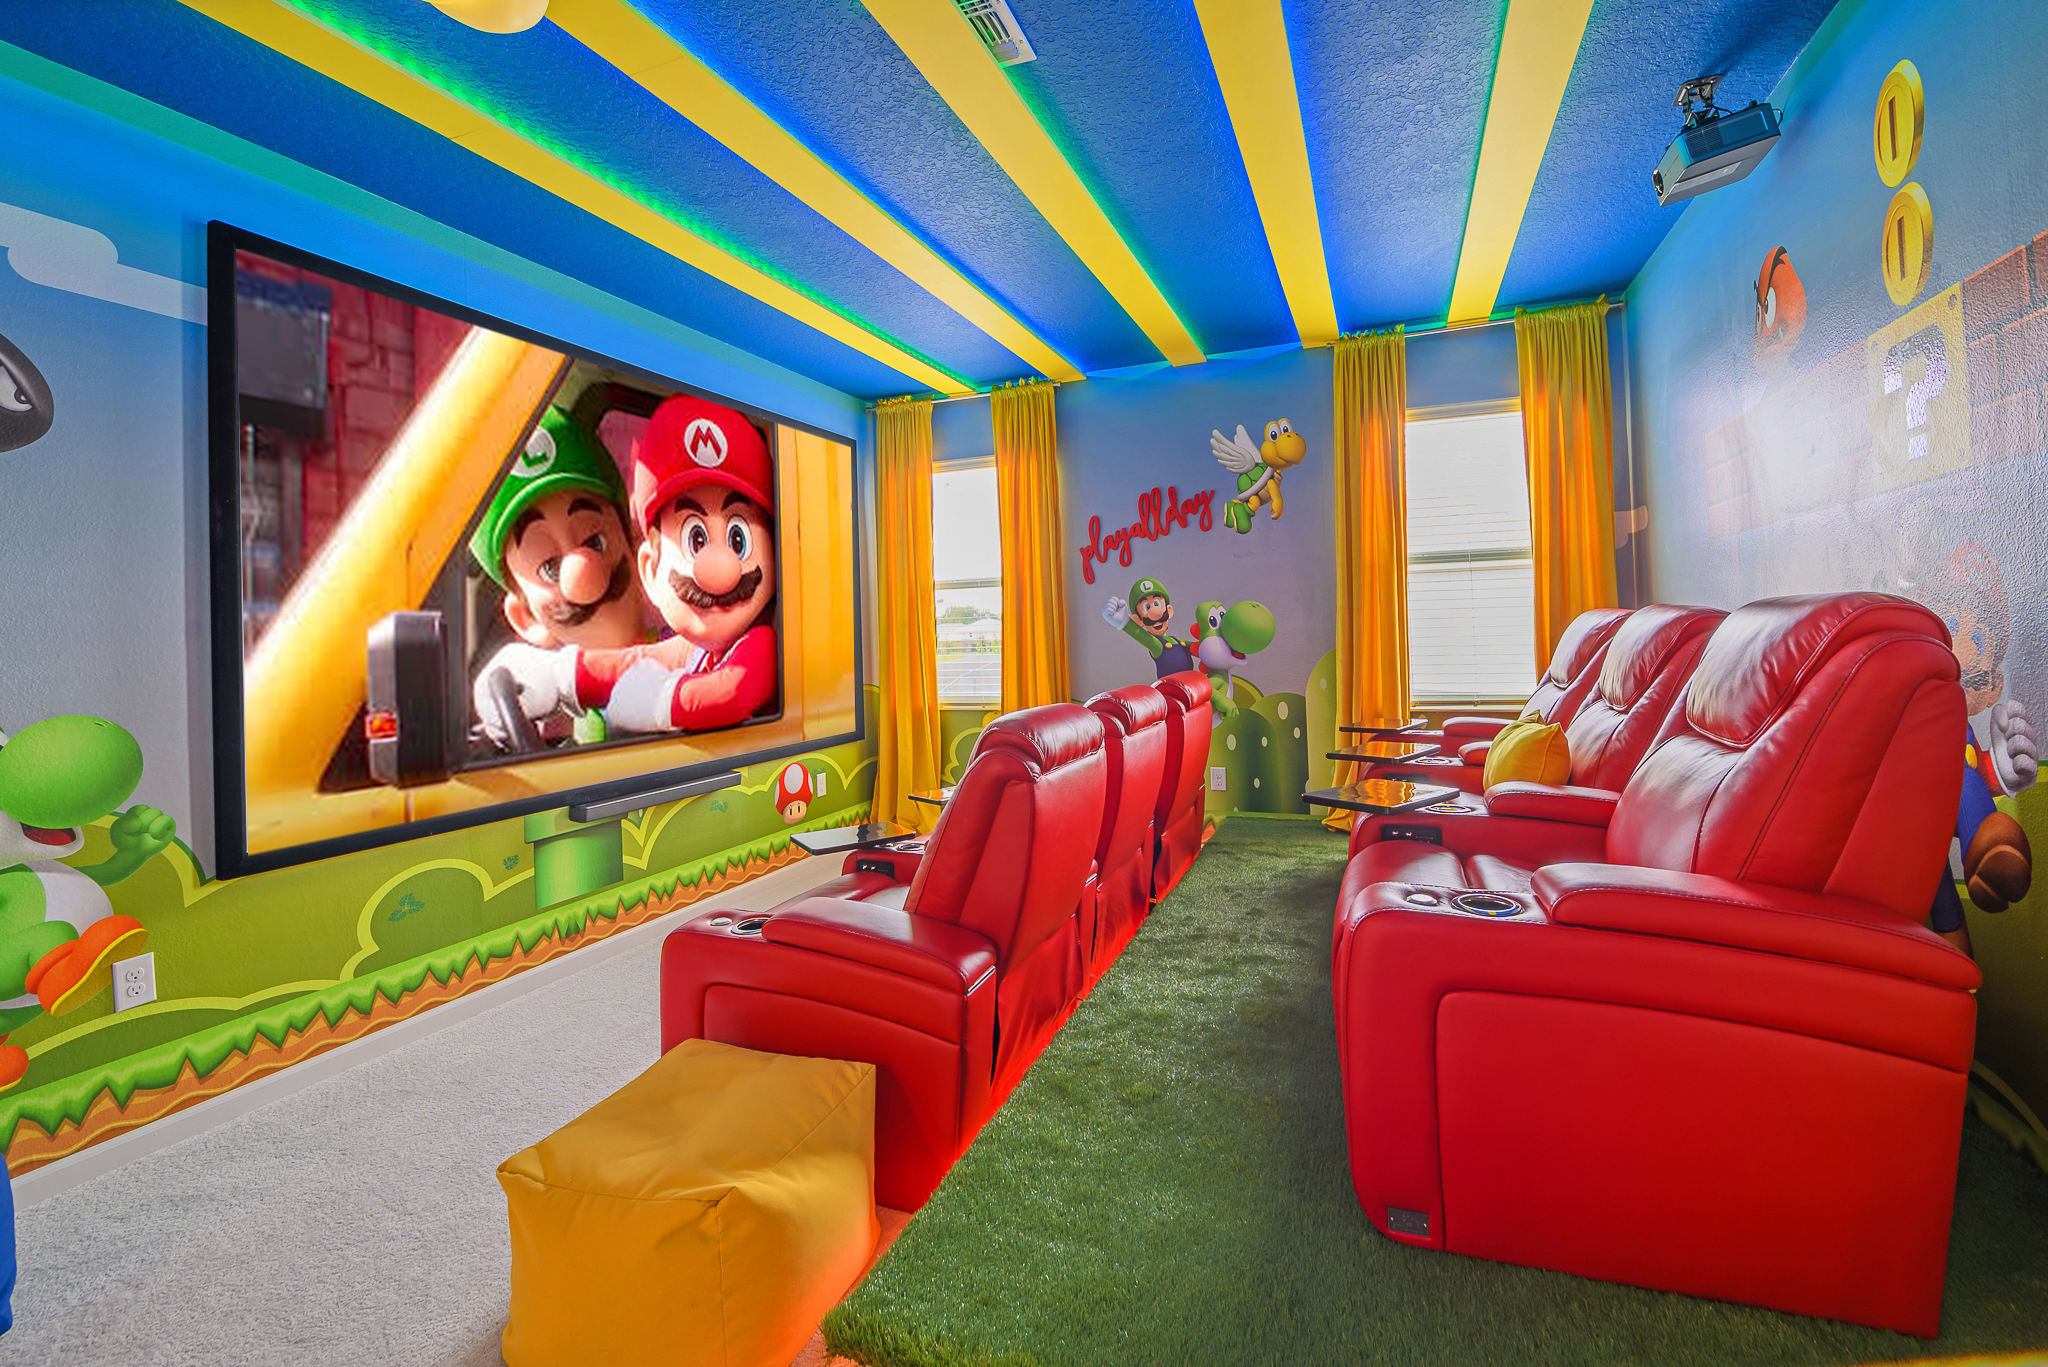 Luxury 8BR Home Games Theater Themed Rooms